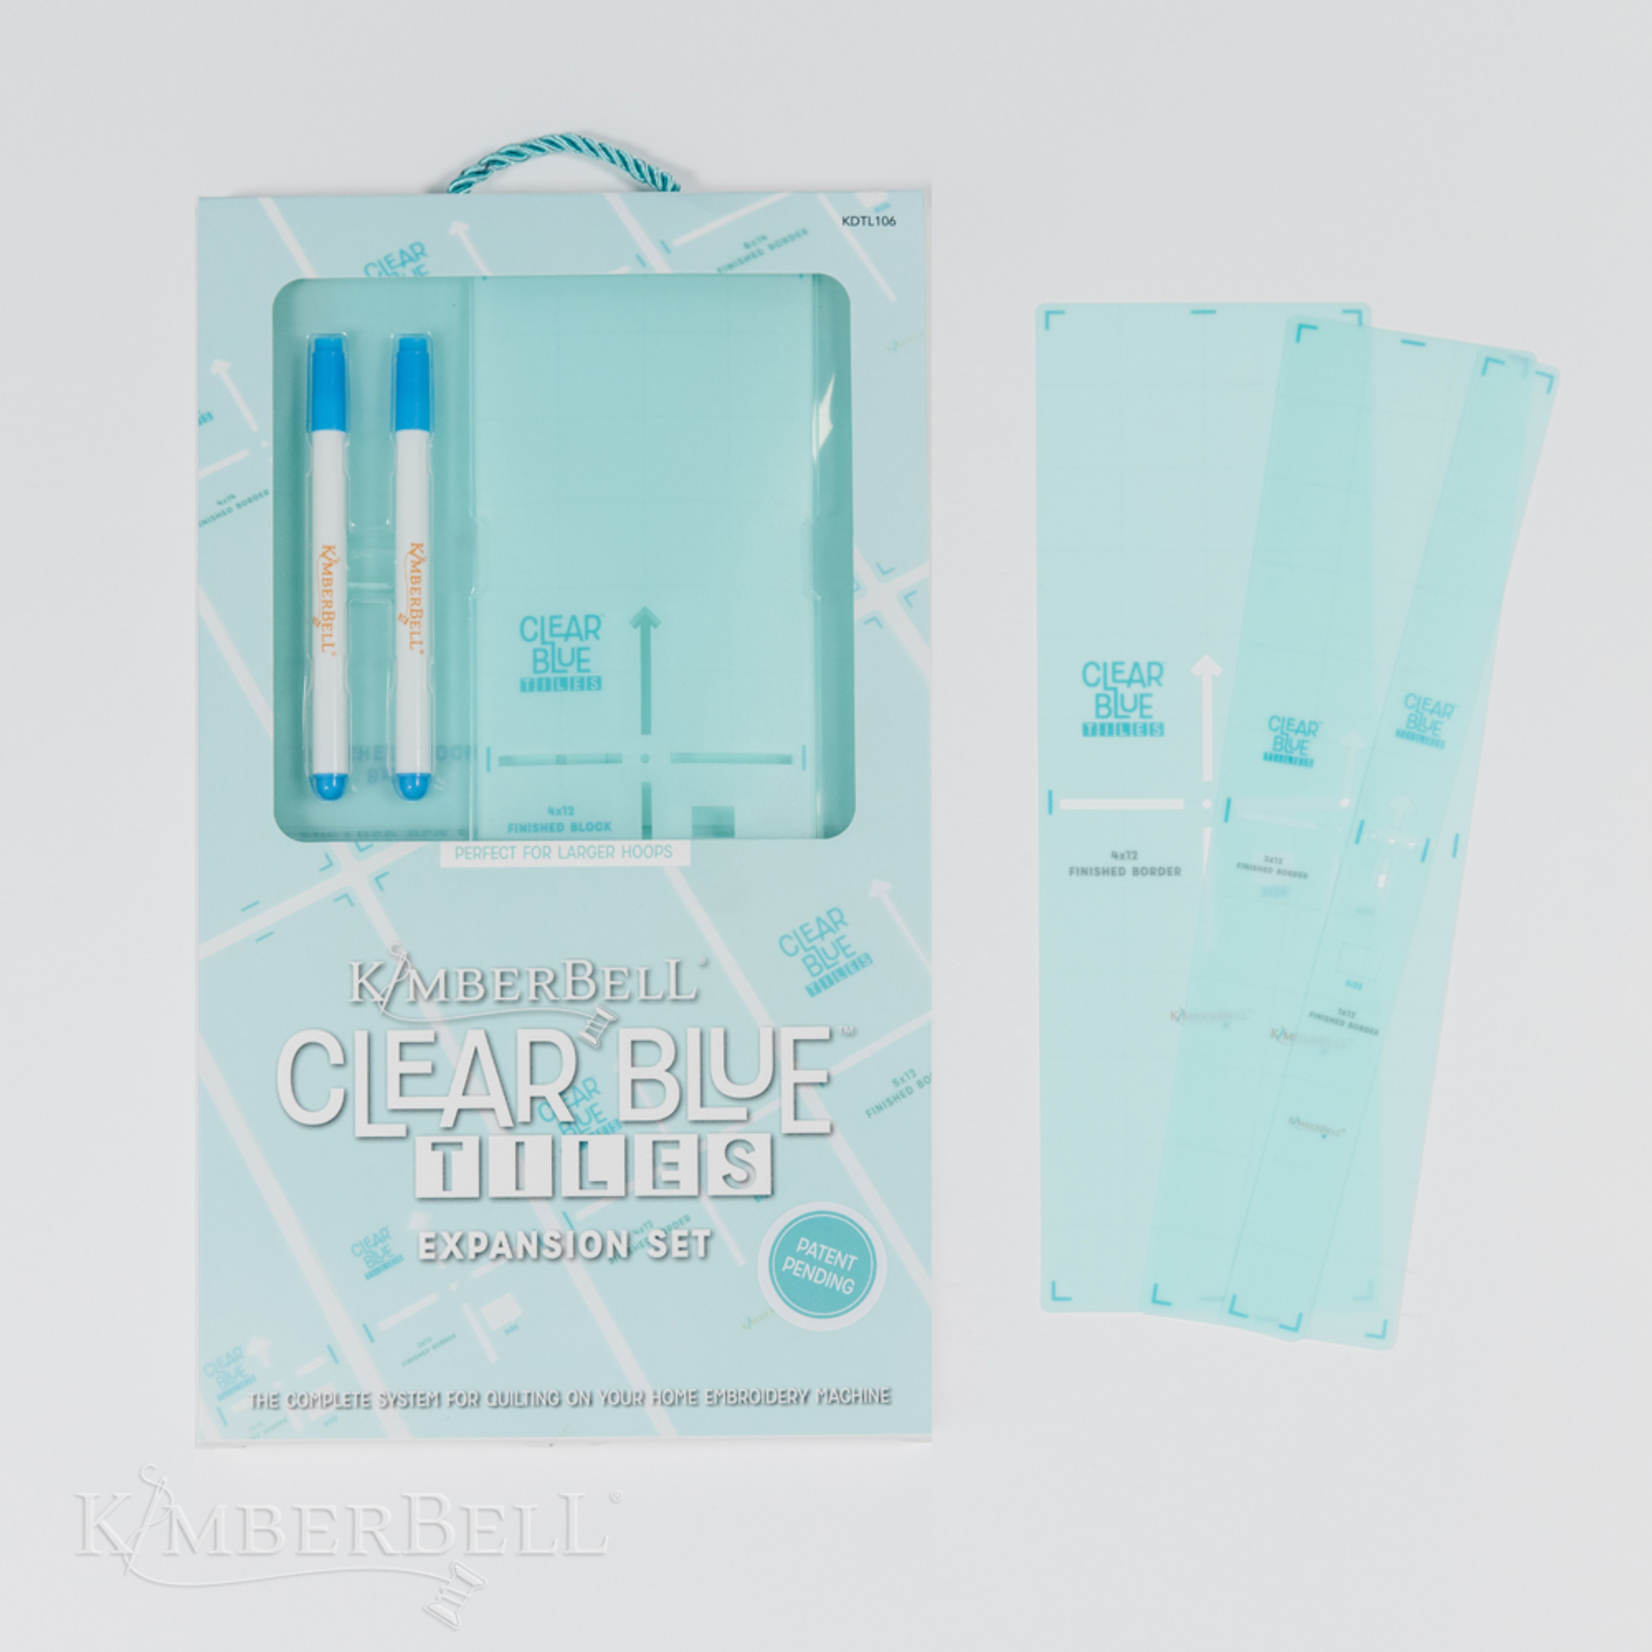 Kimberbell Designs Clear Blue Tiles: Expansion Set